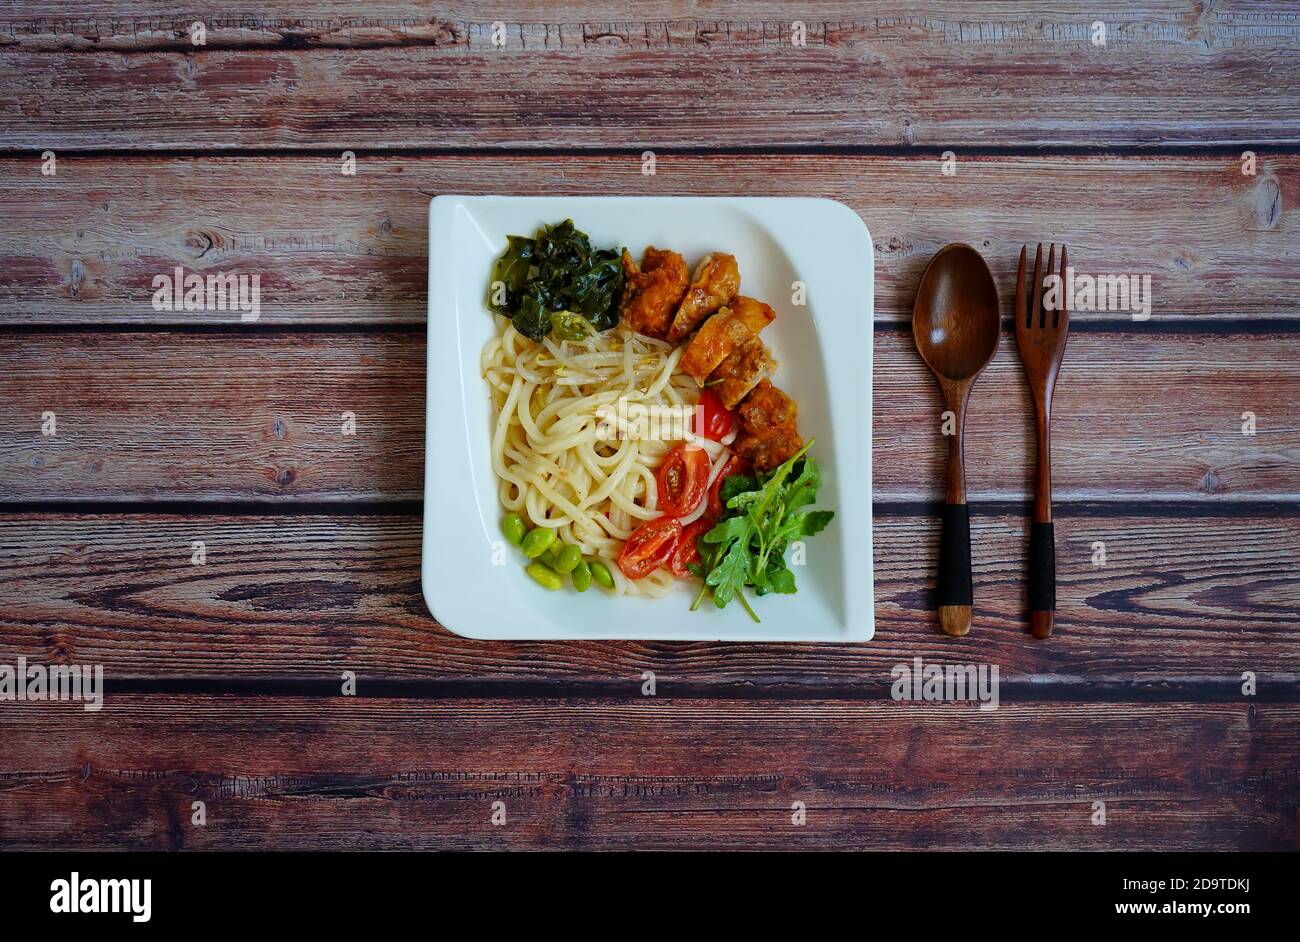 Japanese style salad with udon noodles, chicken, spinach, edamame (soy) beans and vegetables. Stock Photo